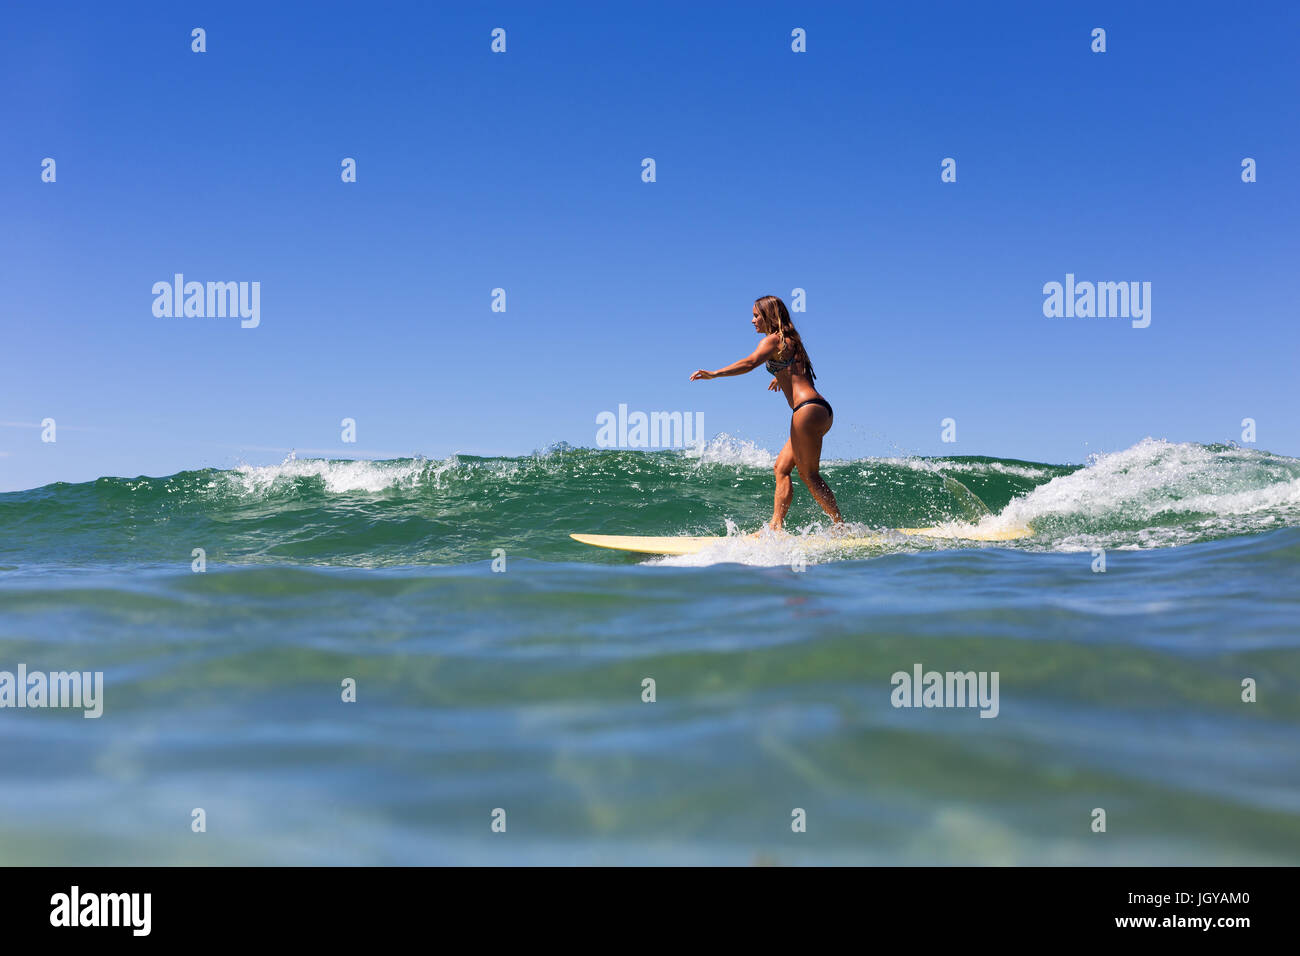 A healthy, tanned girl surfs over pristine clear water during summer in Australia. Stock Photo